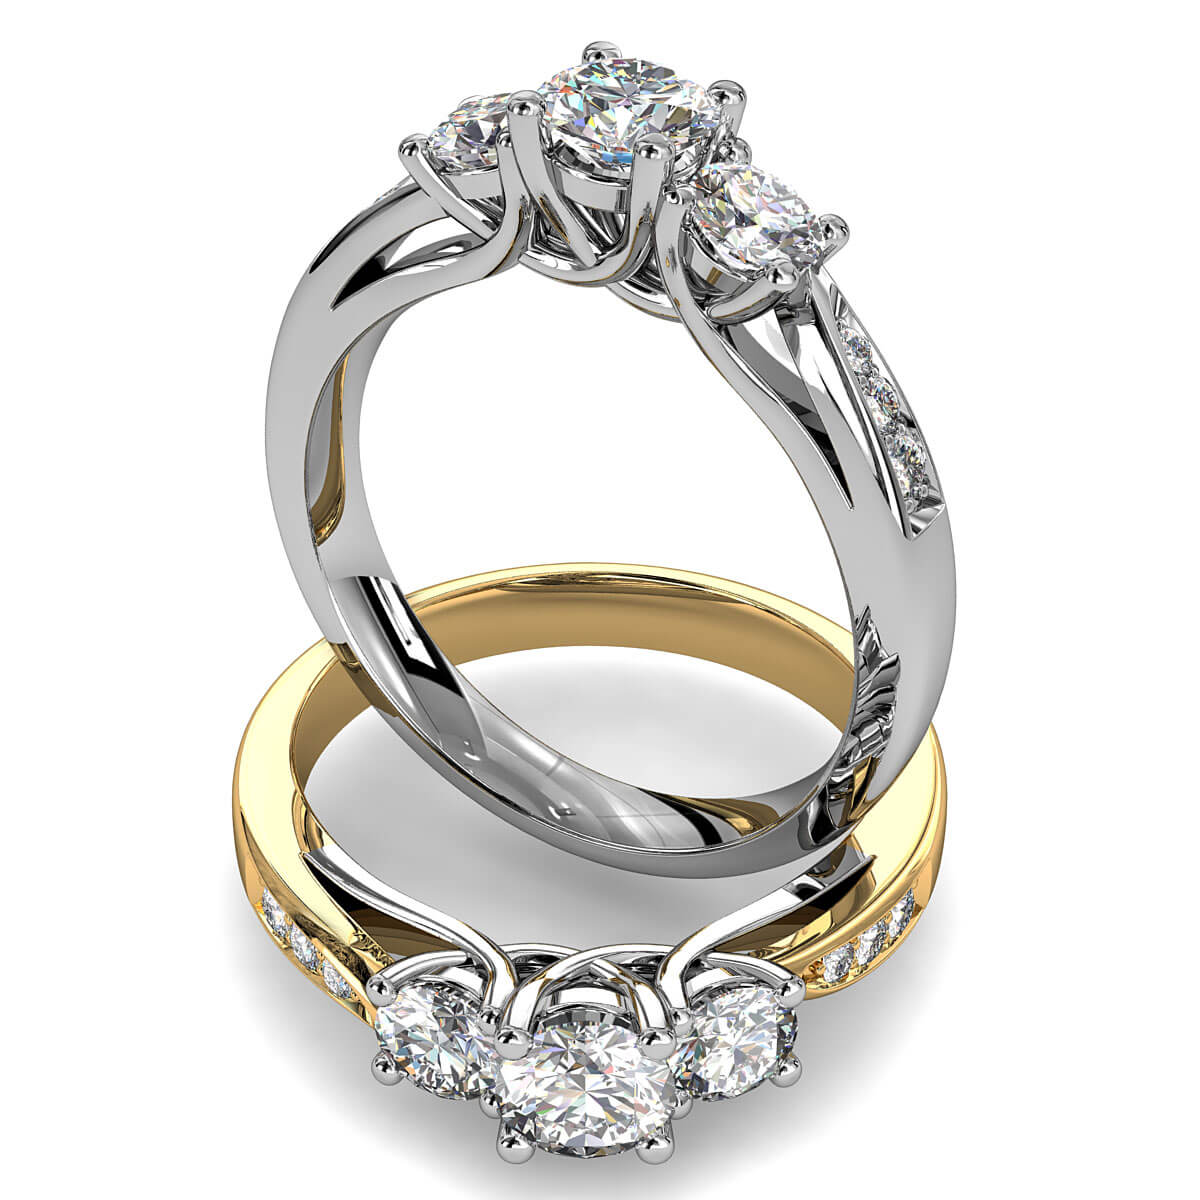 Round Brilliant Cut Diamond Trilogy Engagement Ring, Stones 4 Claw Set on a Curved Bead Set Band with Undersweep Setting.